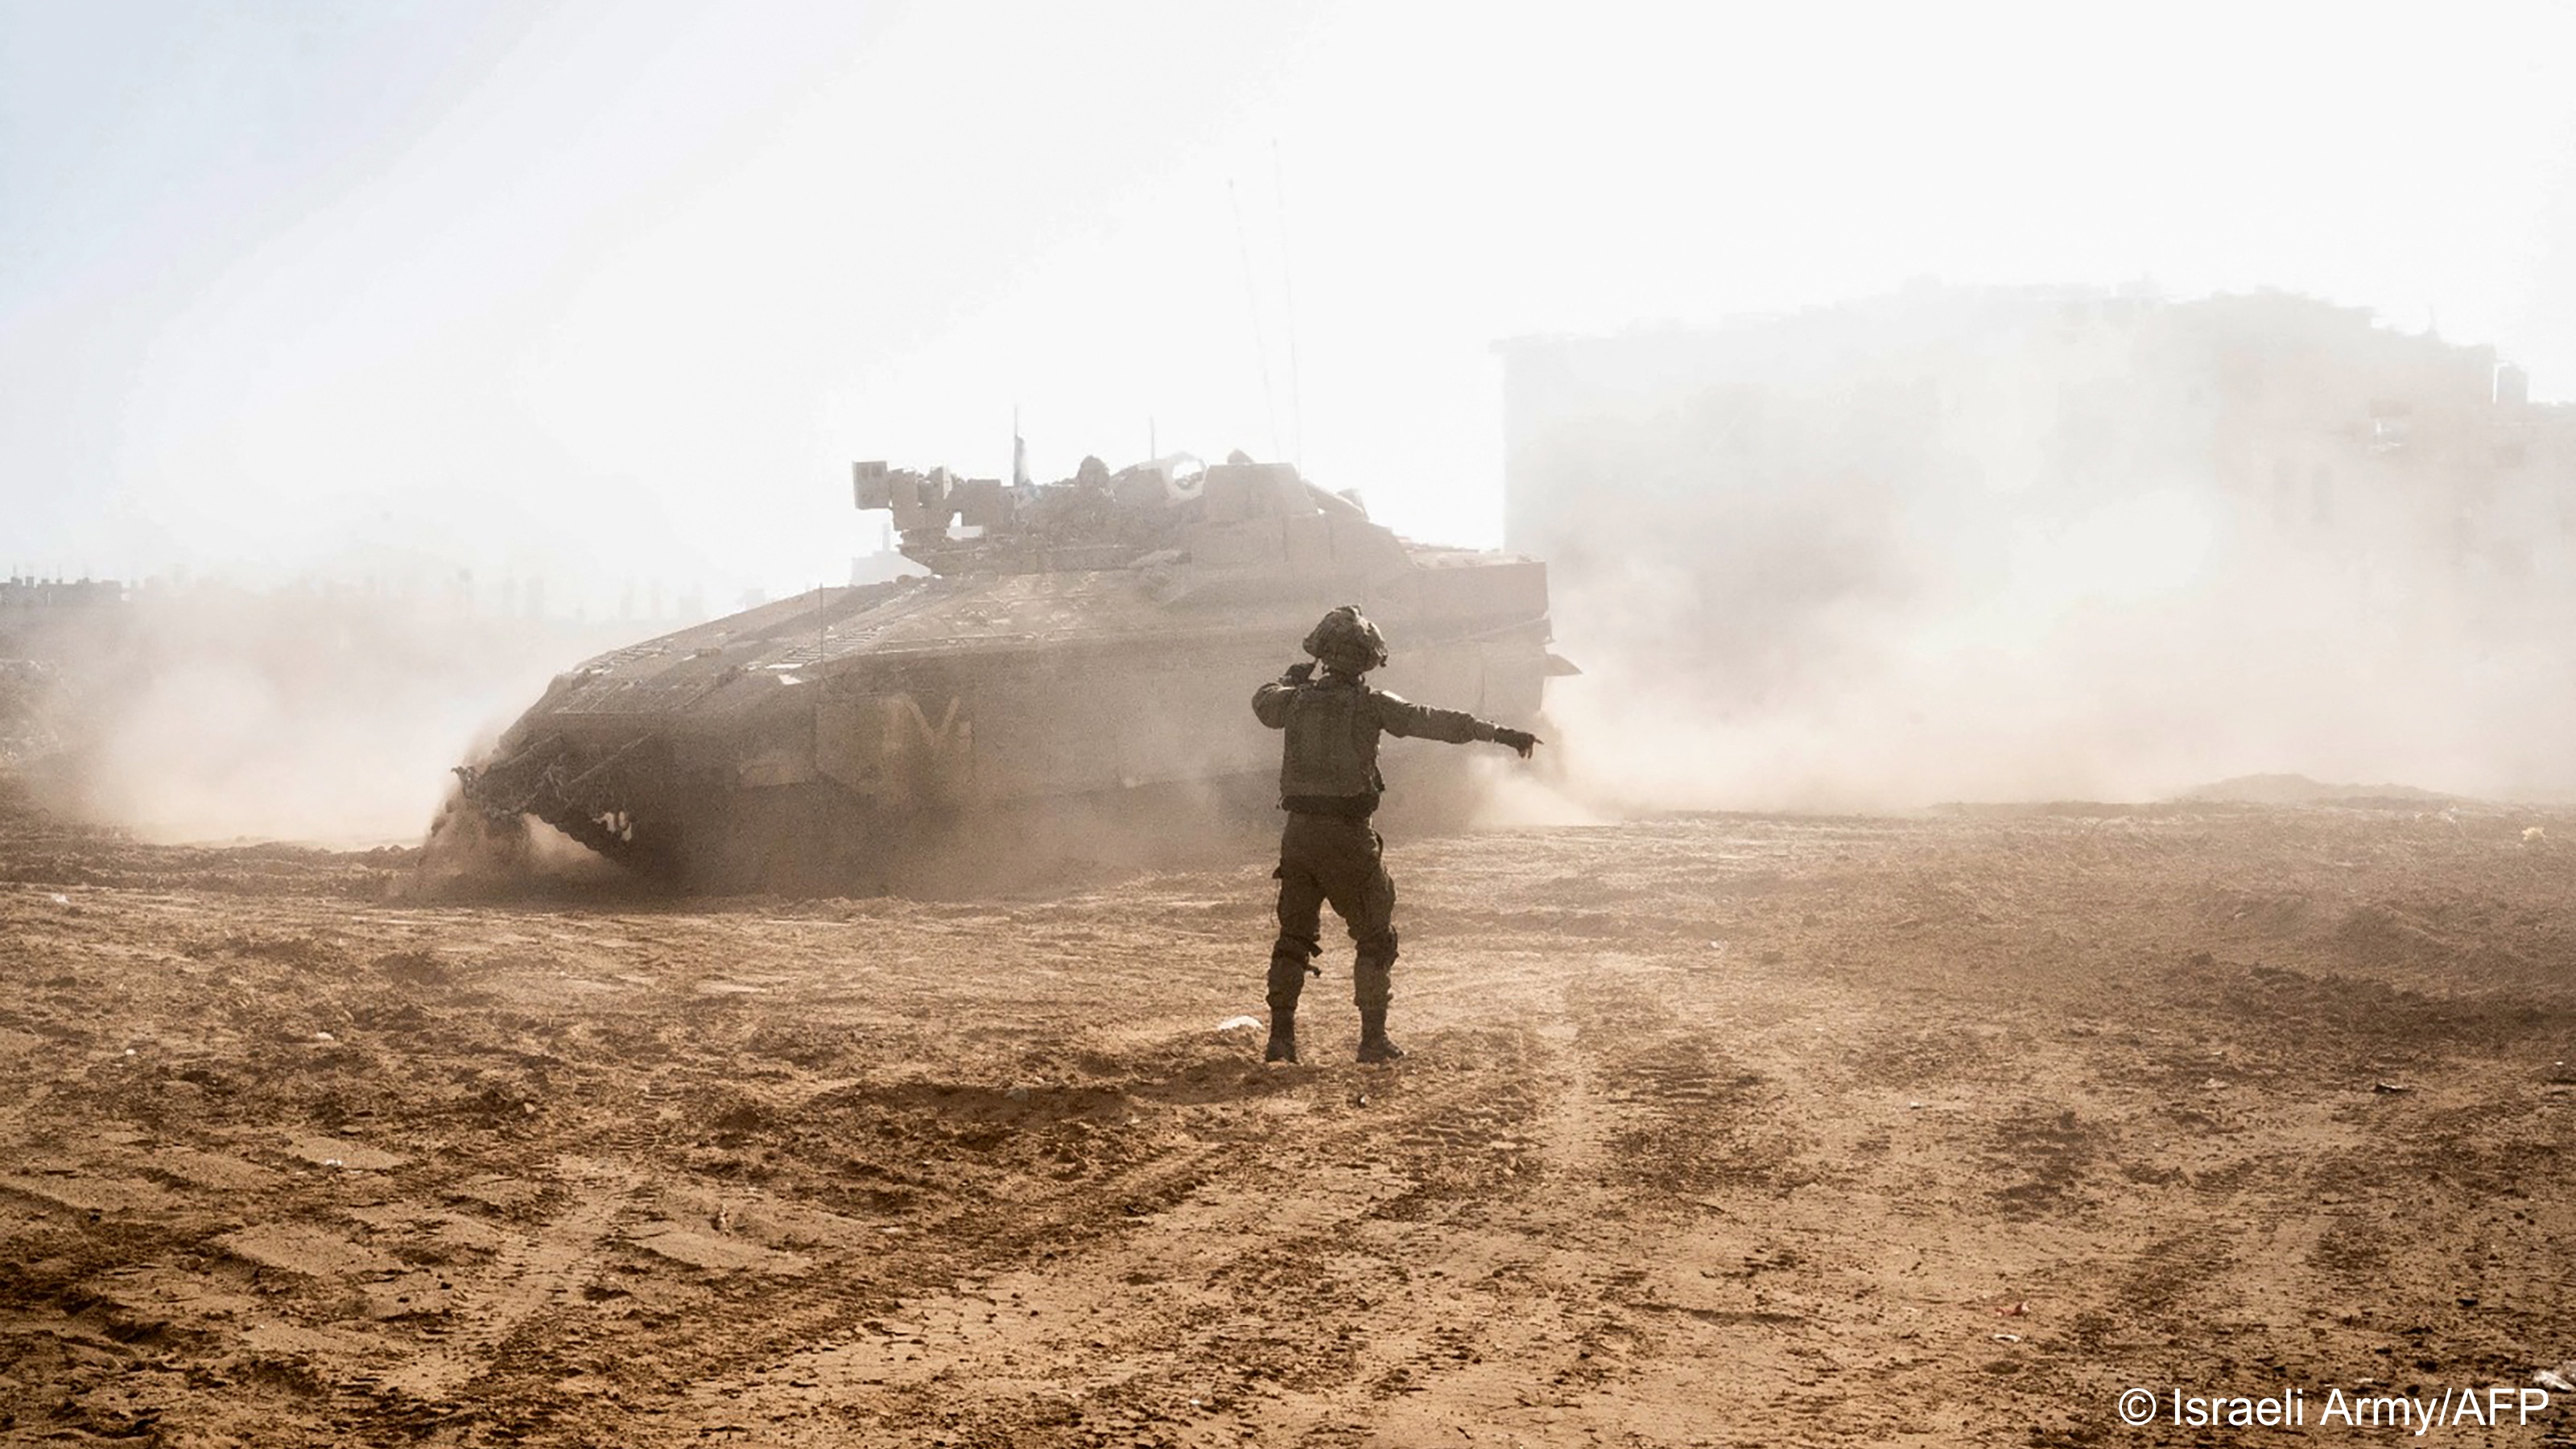 Israeli soldier stands in front of an Israeli tank in Gaza and signals with his right arm